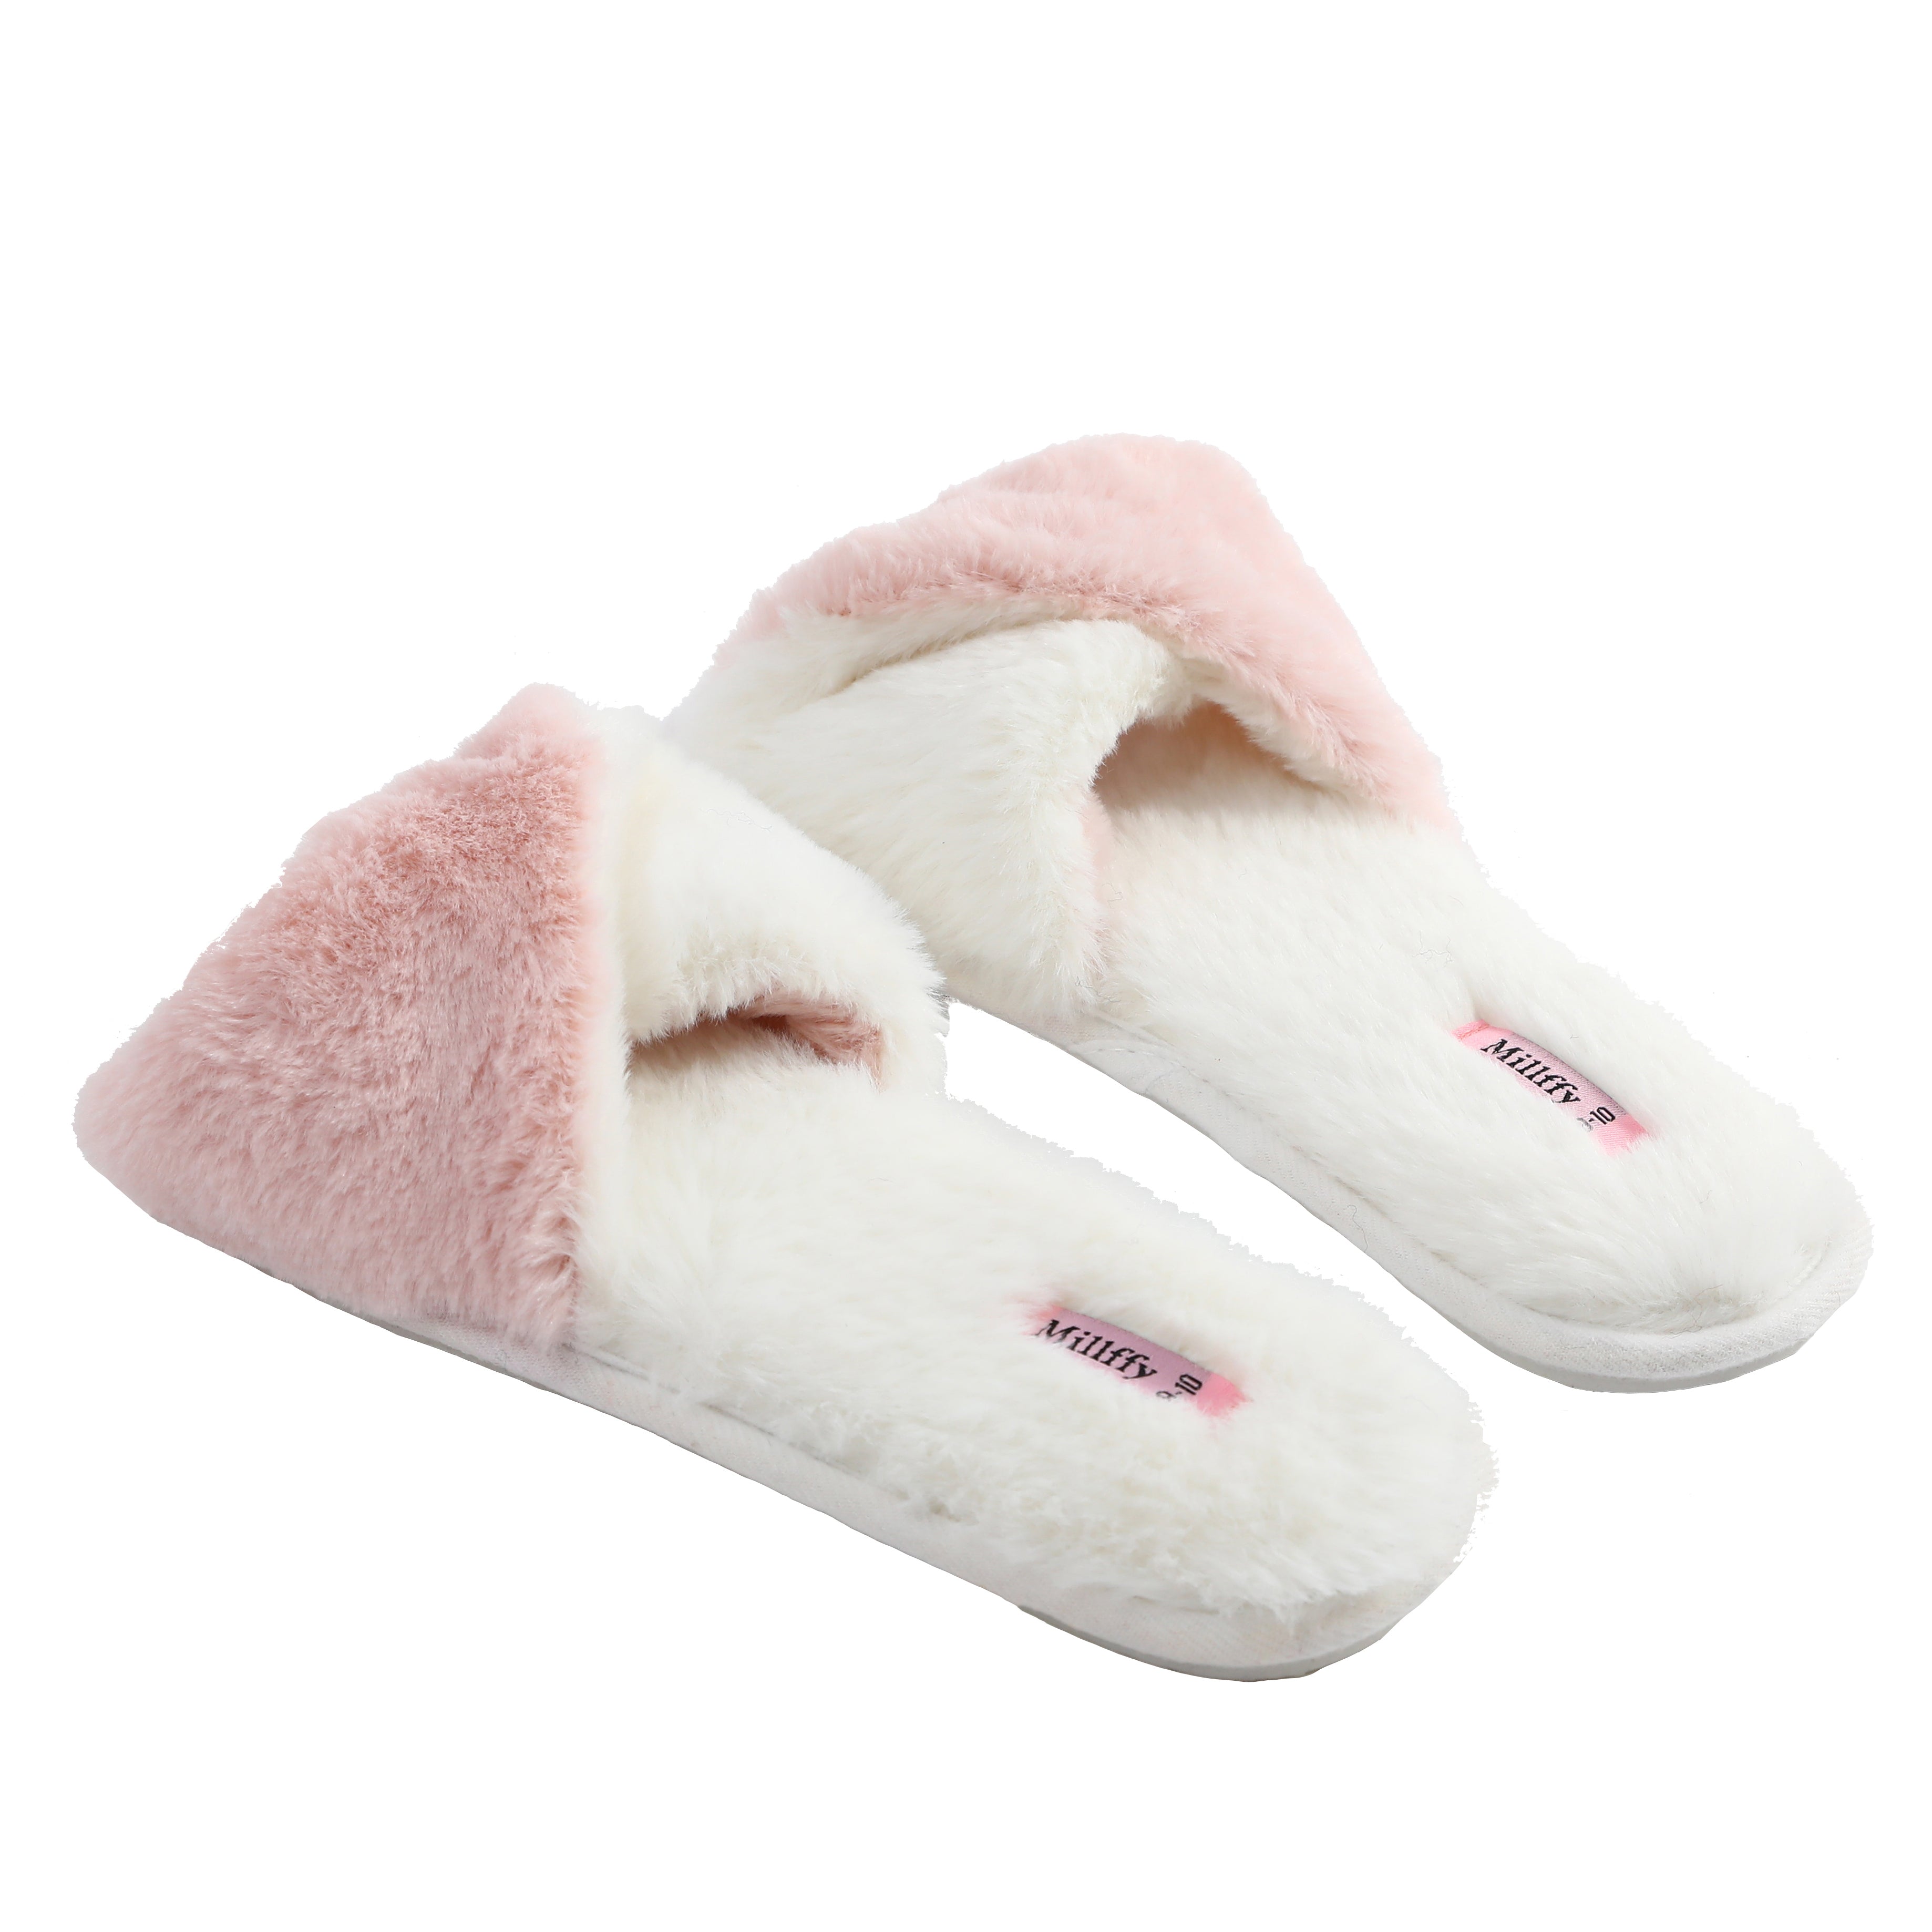 Millffy Cross Band Graceful Women's Slippers cozy comfy Slides